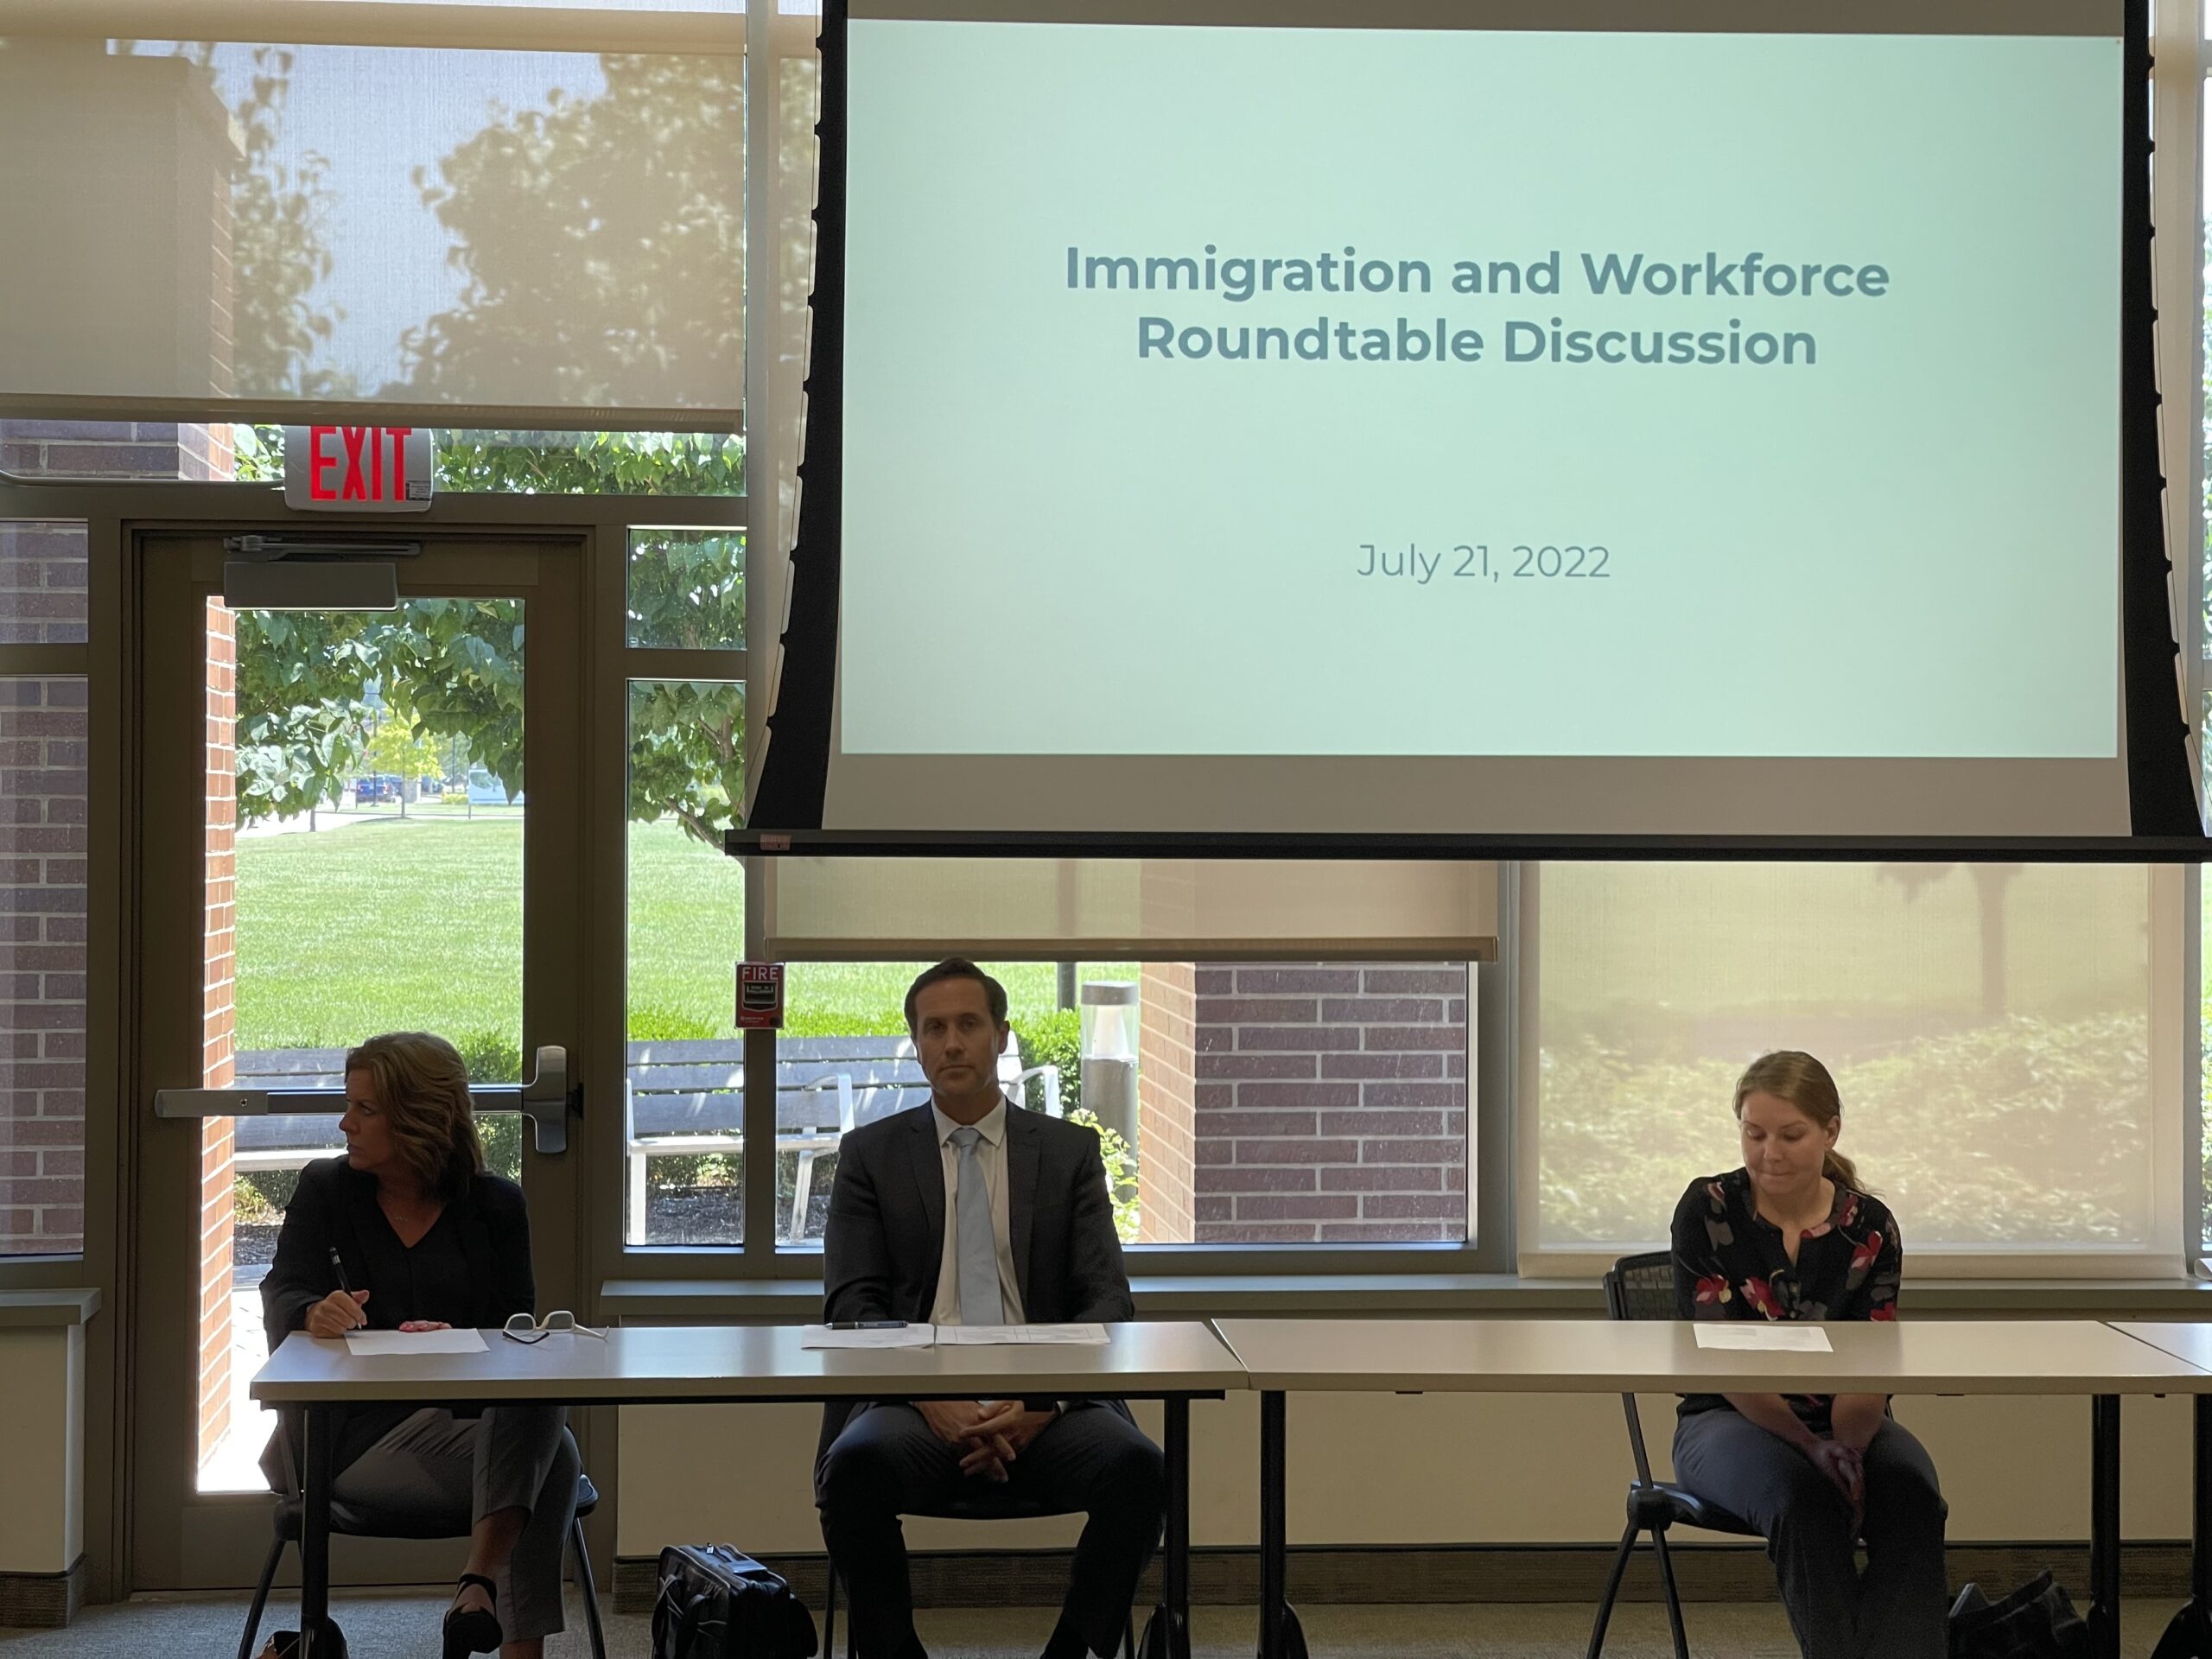 Presenters at the Immigration Roundtable